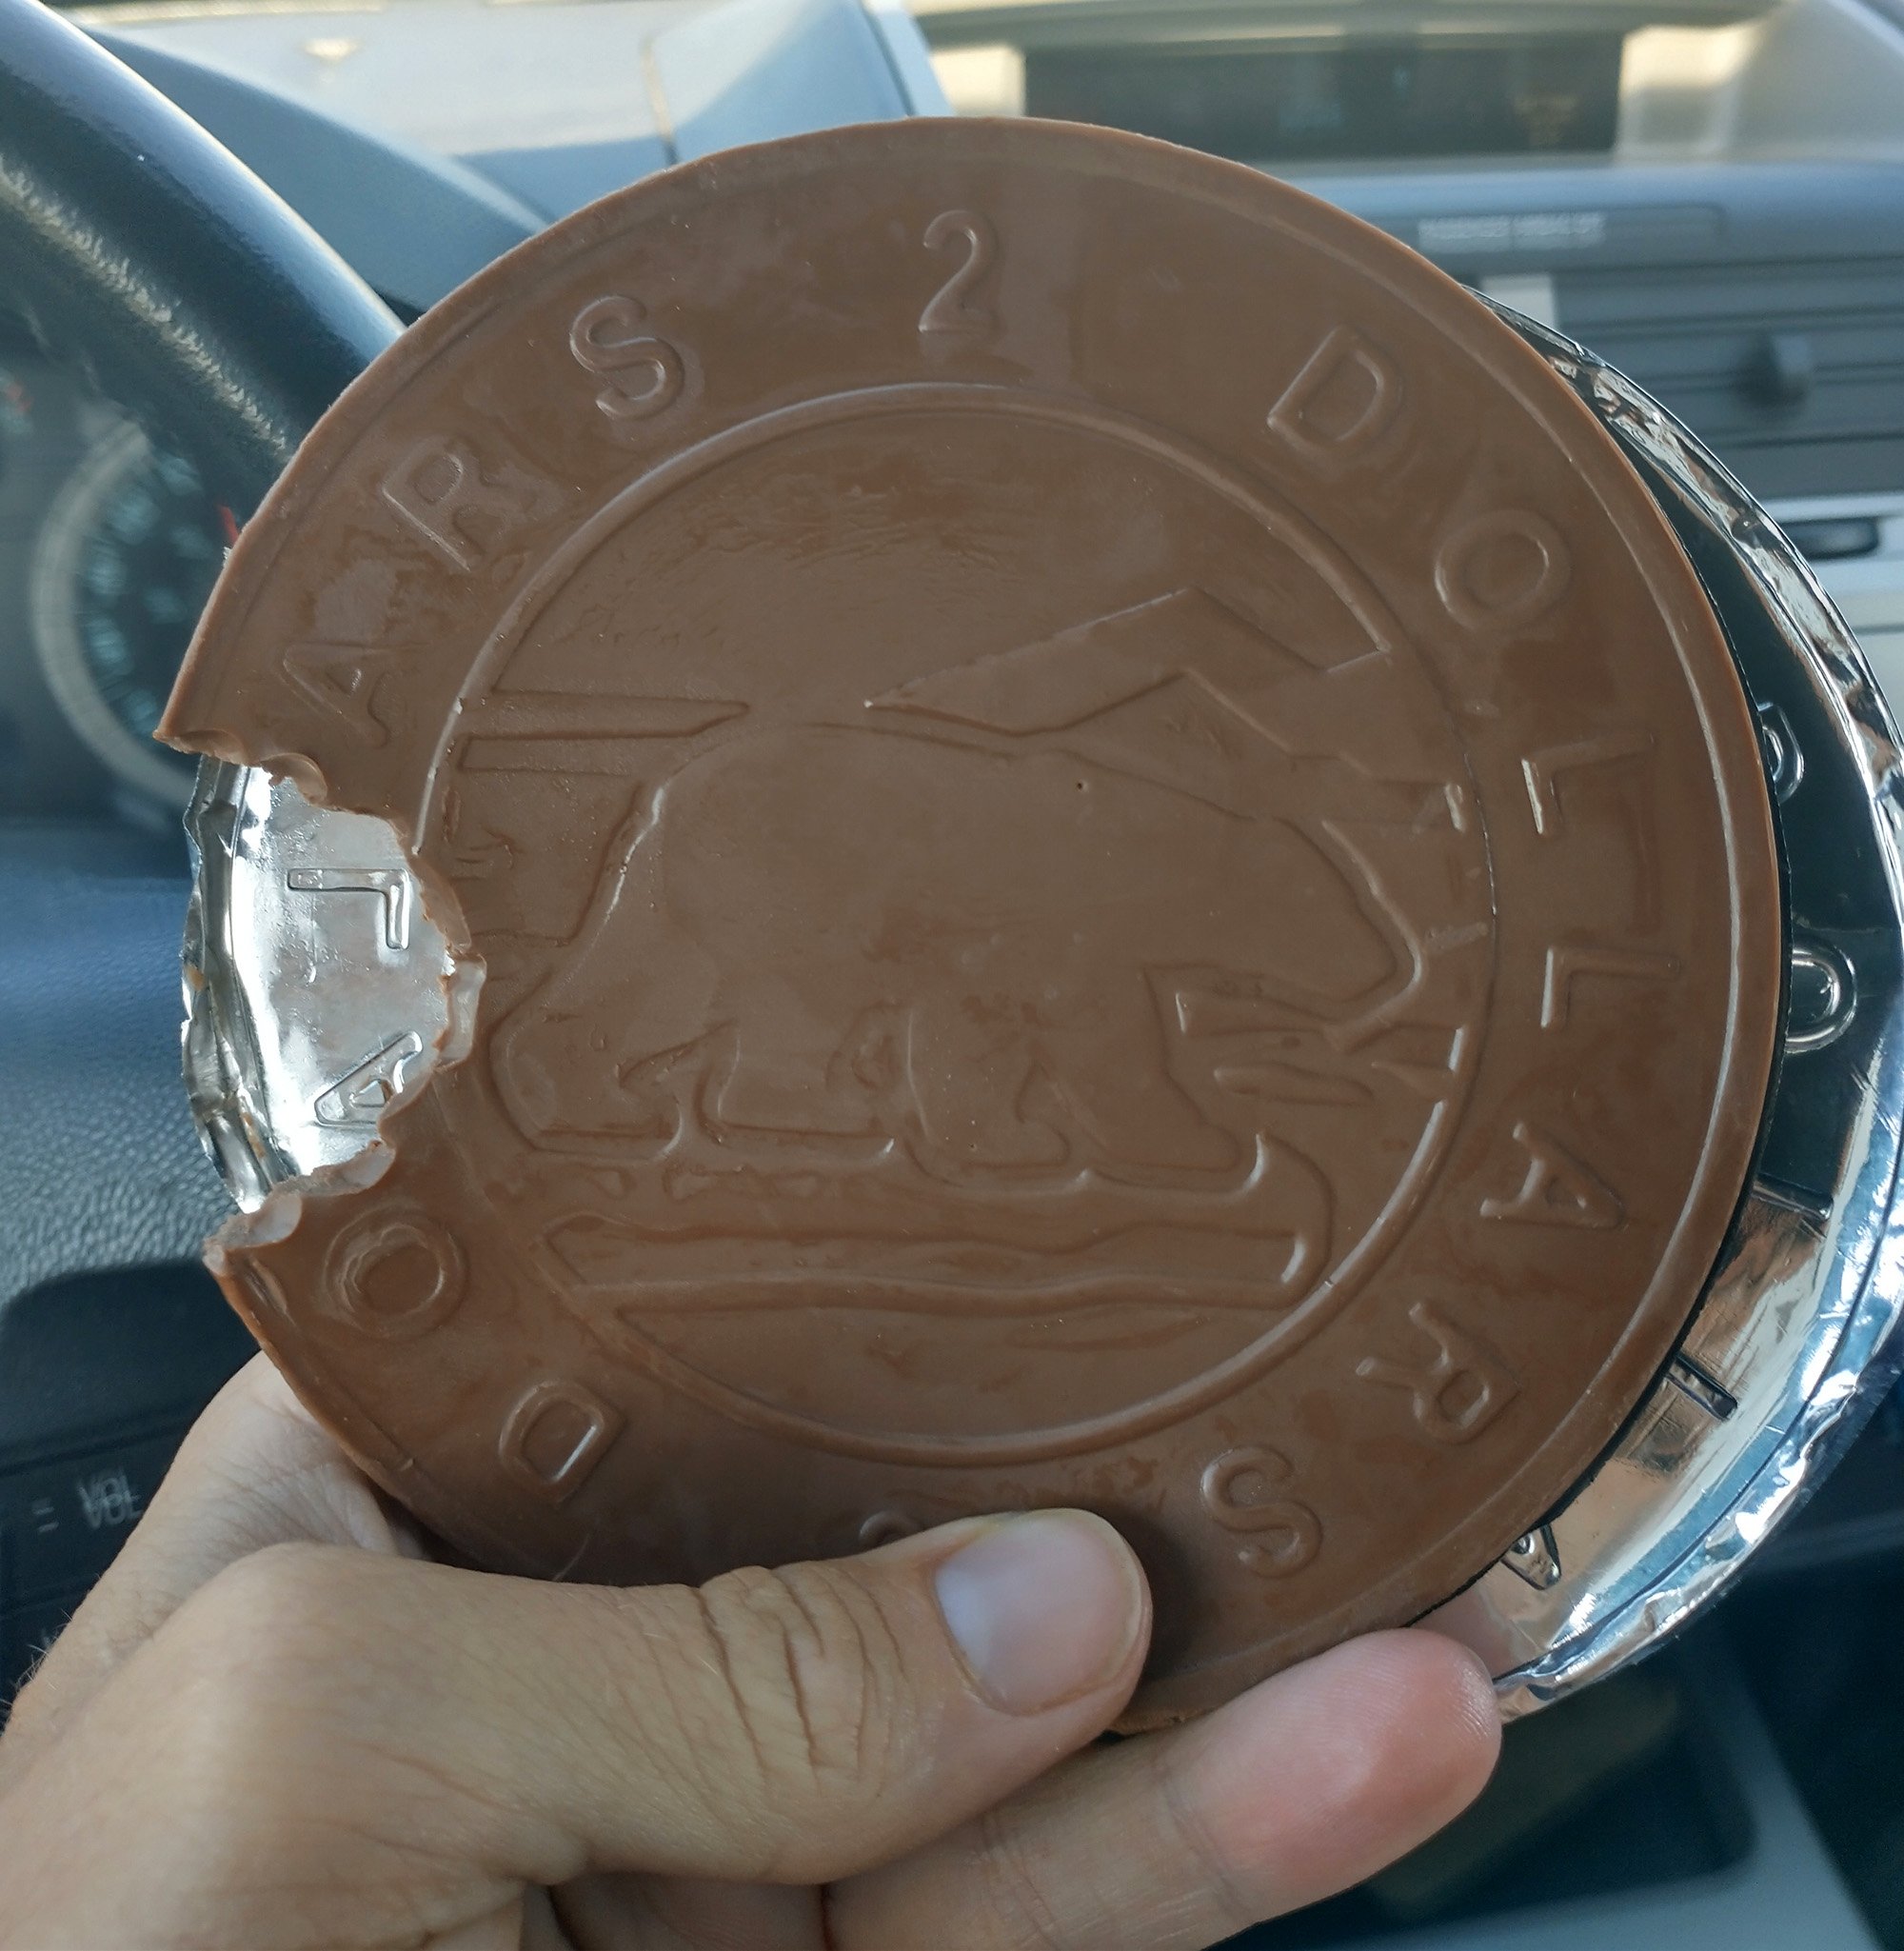 That sweet dollar store 50% wax chocolate. Inflate away, Dollarama! Diner plate size next year.